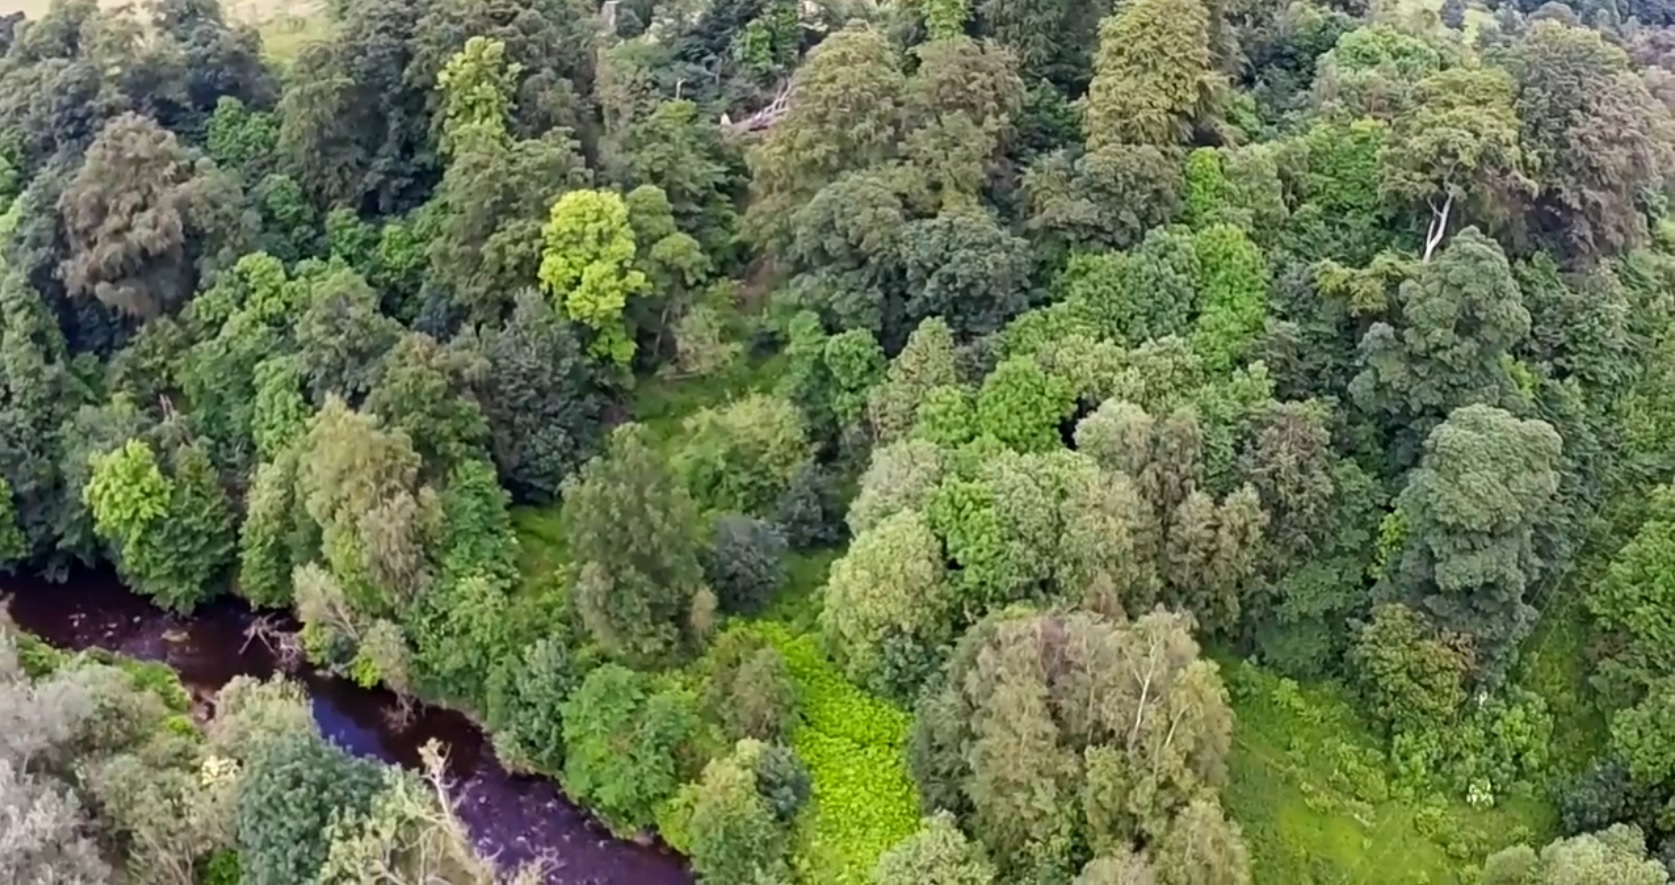 Forest in Scotland, UK seen from above. Credit: EUFORGEN